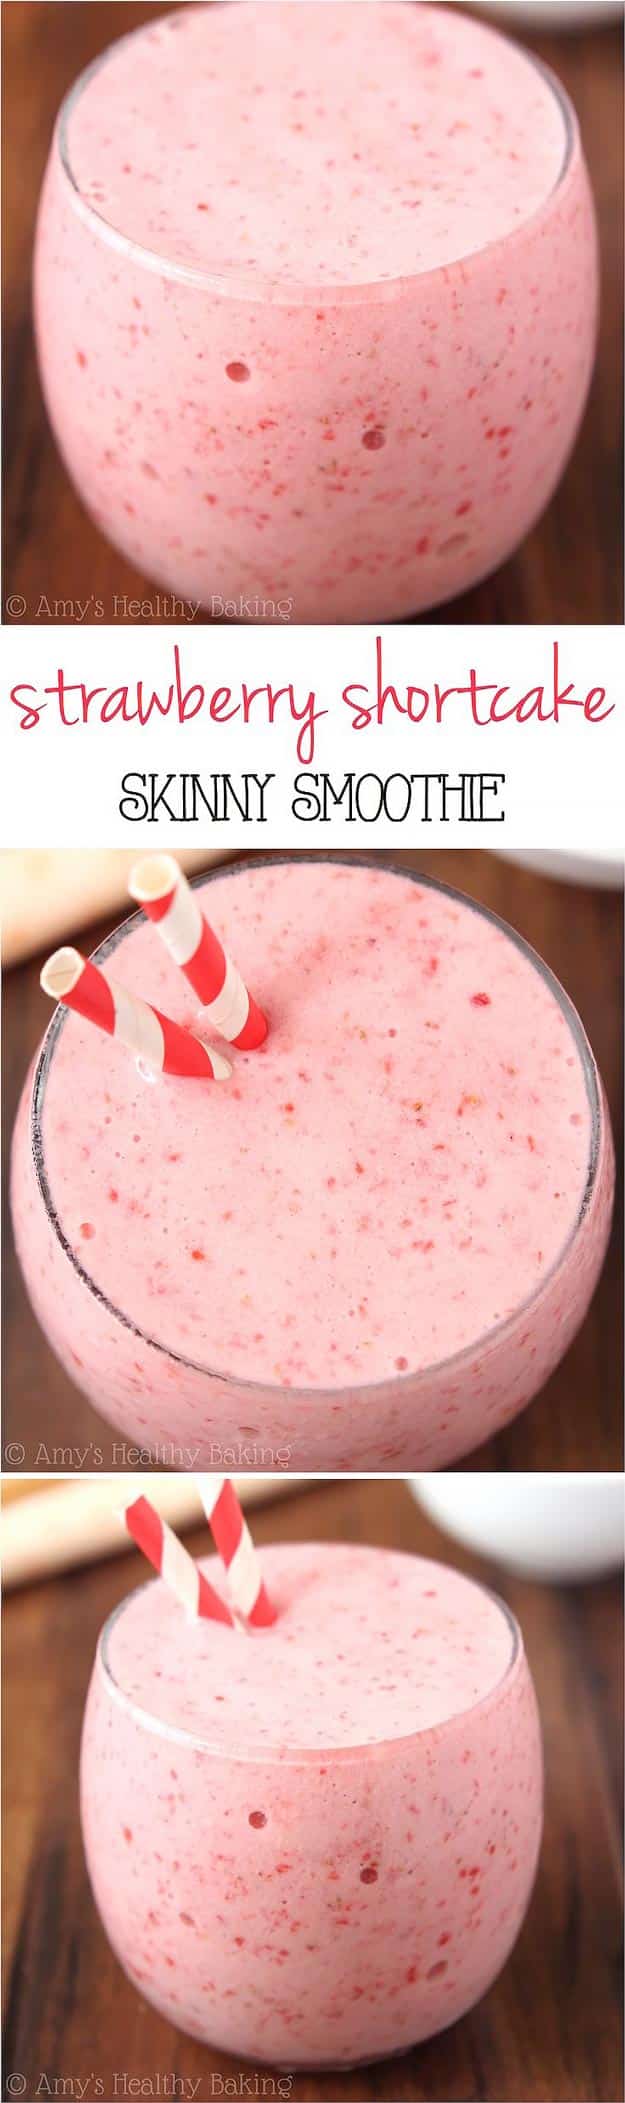 Healthy smoothie recipes and easy ideas perfect for breakfast, energy. Low calorie and high protein recipes for weightloss and to lose weight. Simple homemade recipe ideas that kids love. | Skinny Strawberry Shortcake Smoothie #smoothies #recipess